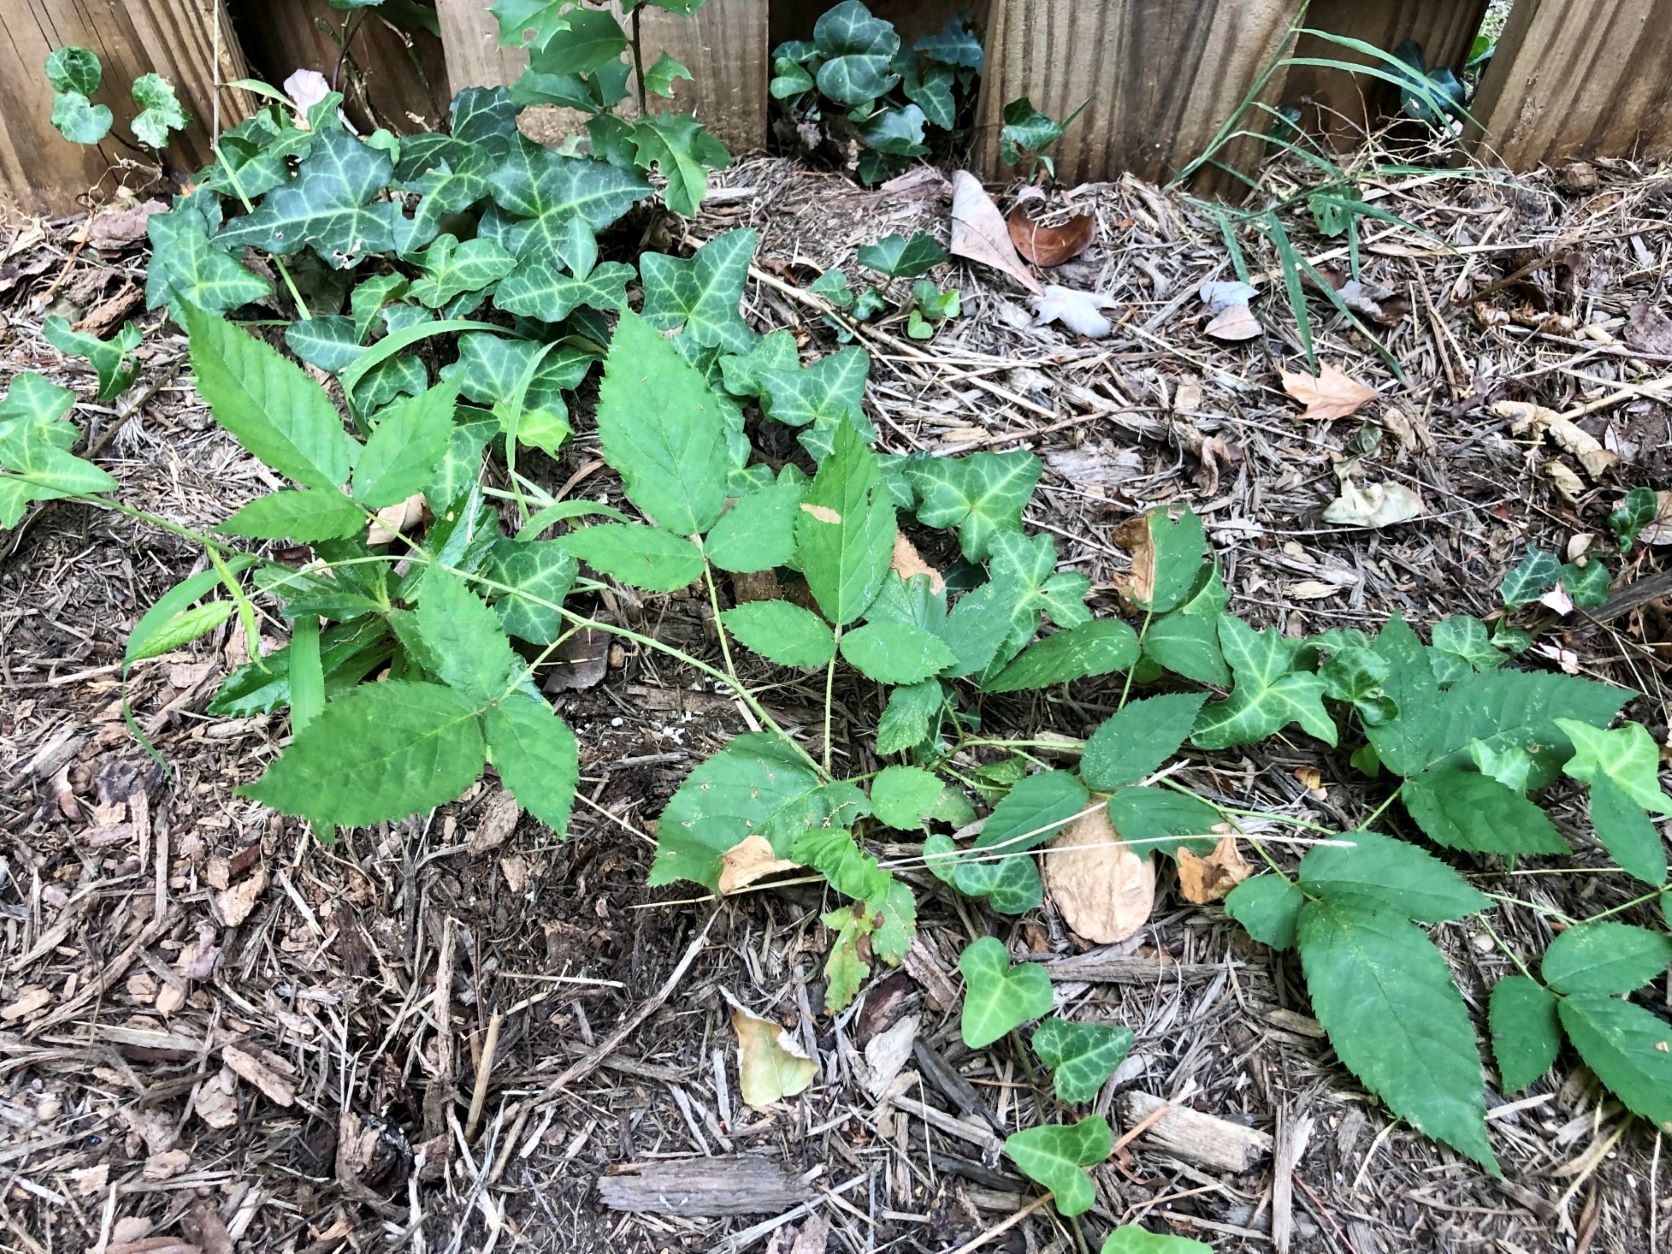 Poison Ivy growing inside the backyard.